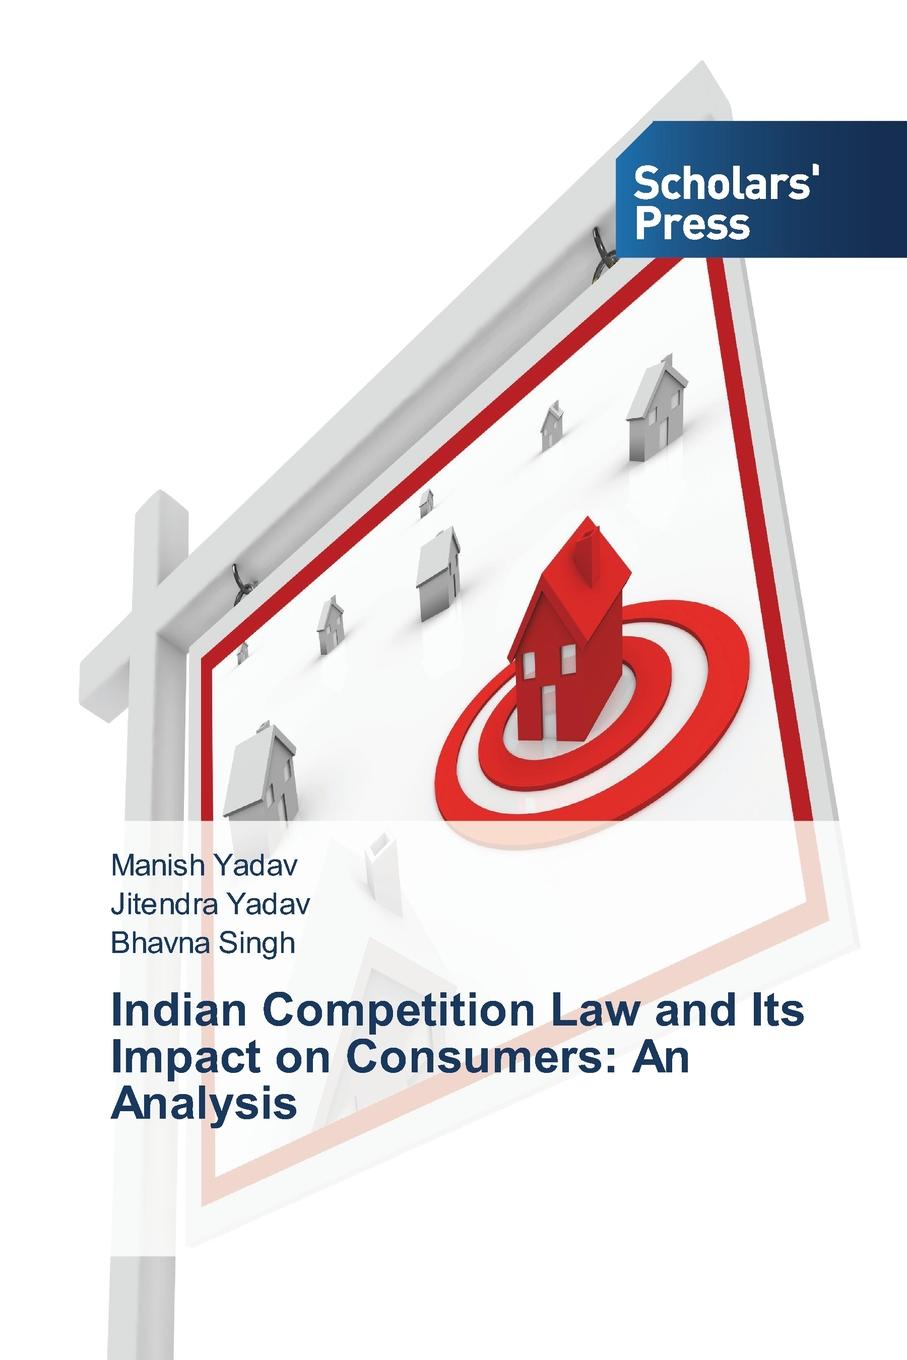 Indian Competition Law and Its Impact on Consumers. An Analysis